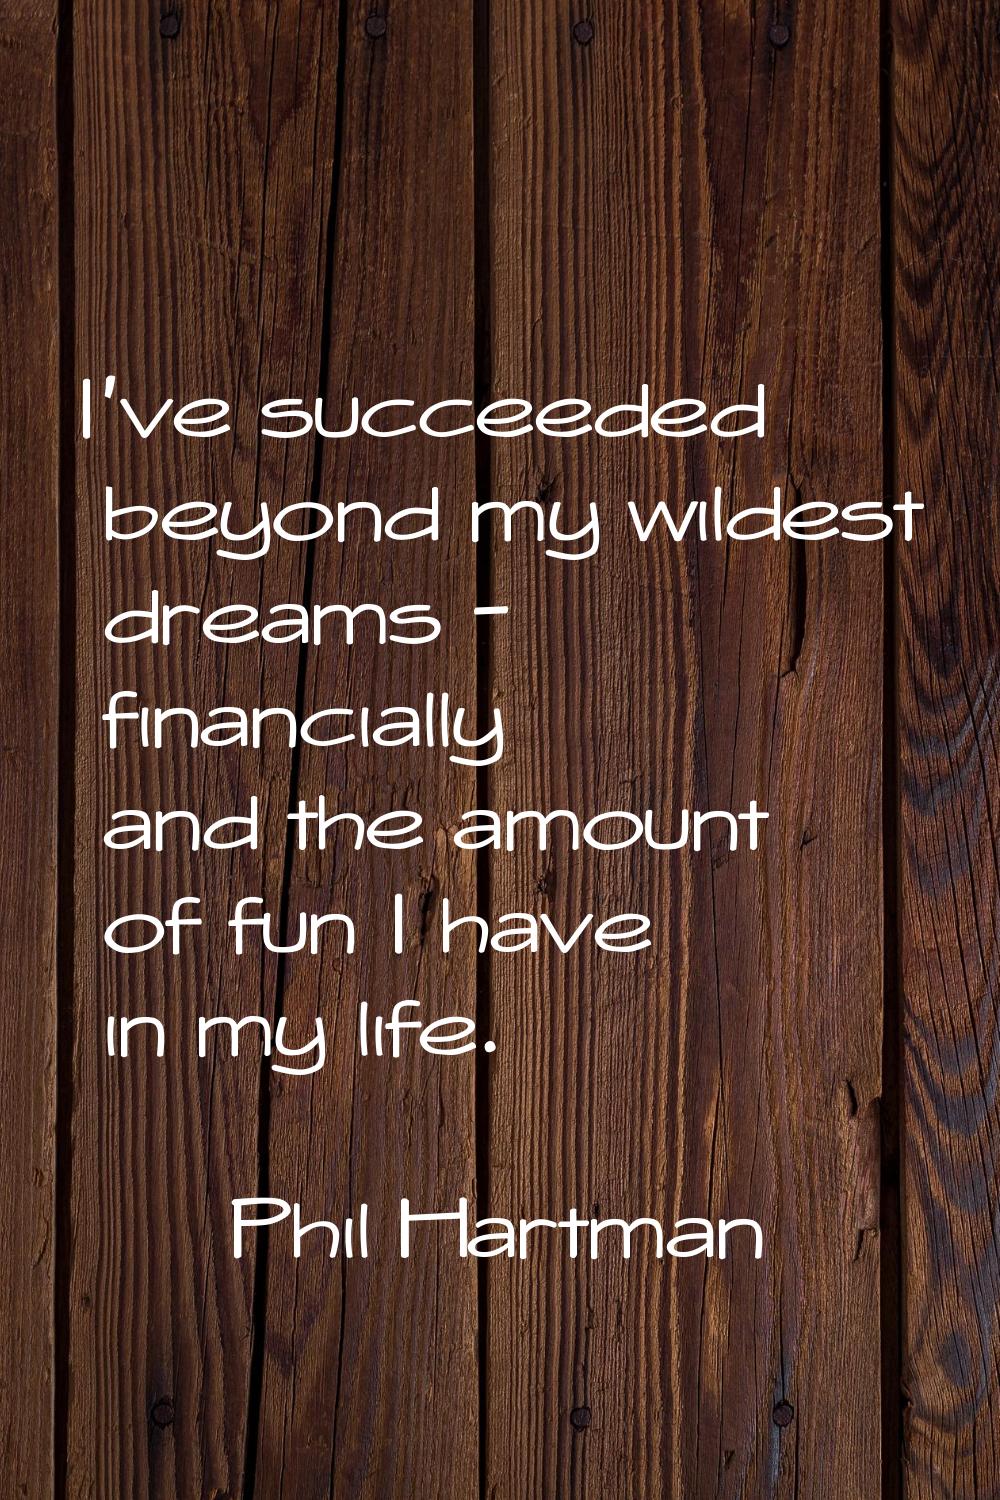 I've succeeded beyond my wildest dreams - financially and the amount of fun I have in my life.